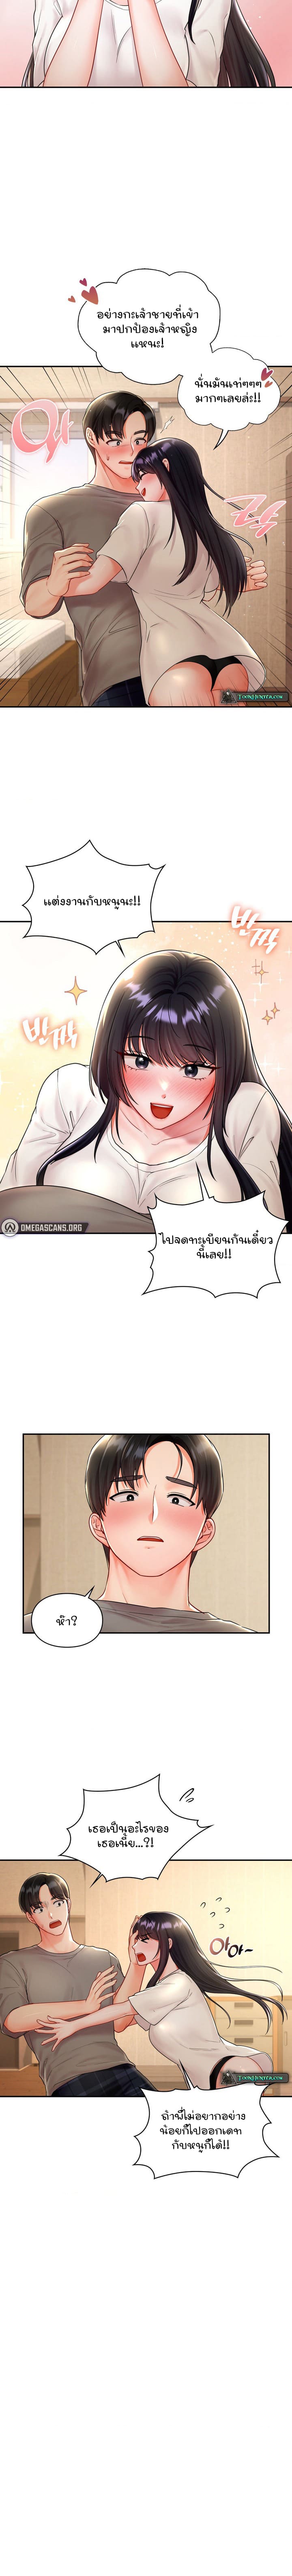 The Kid Is Obsessed With Me ตอนที่ 4 ภาพ 5